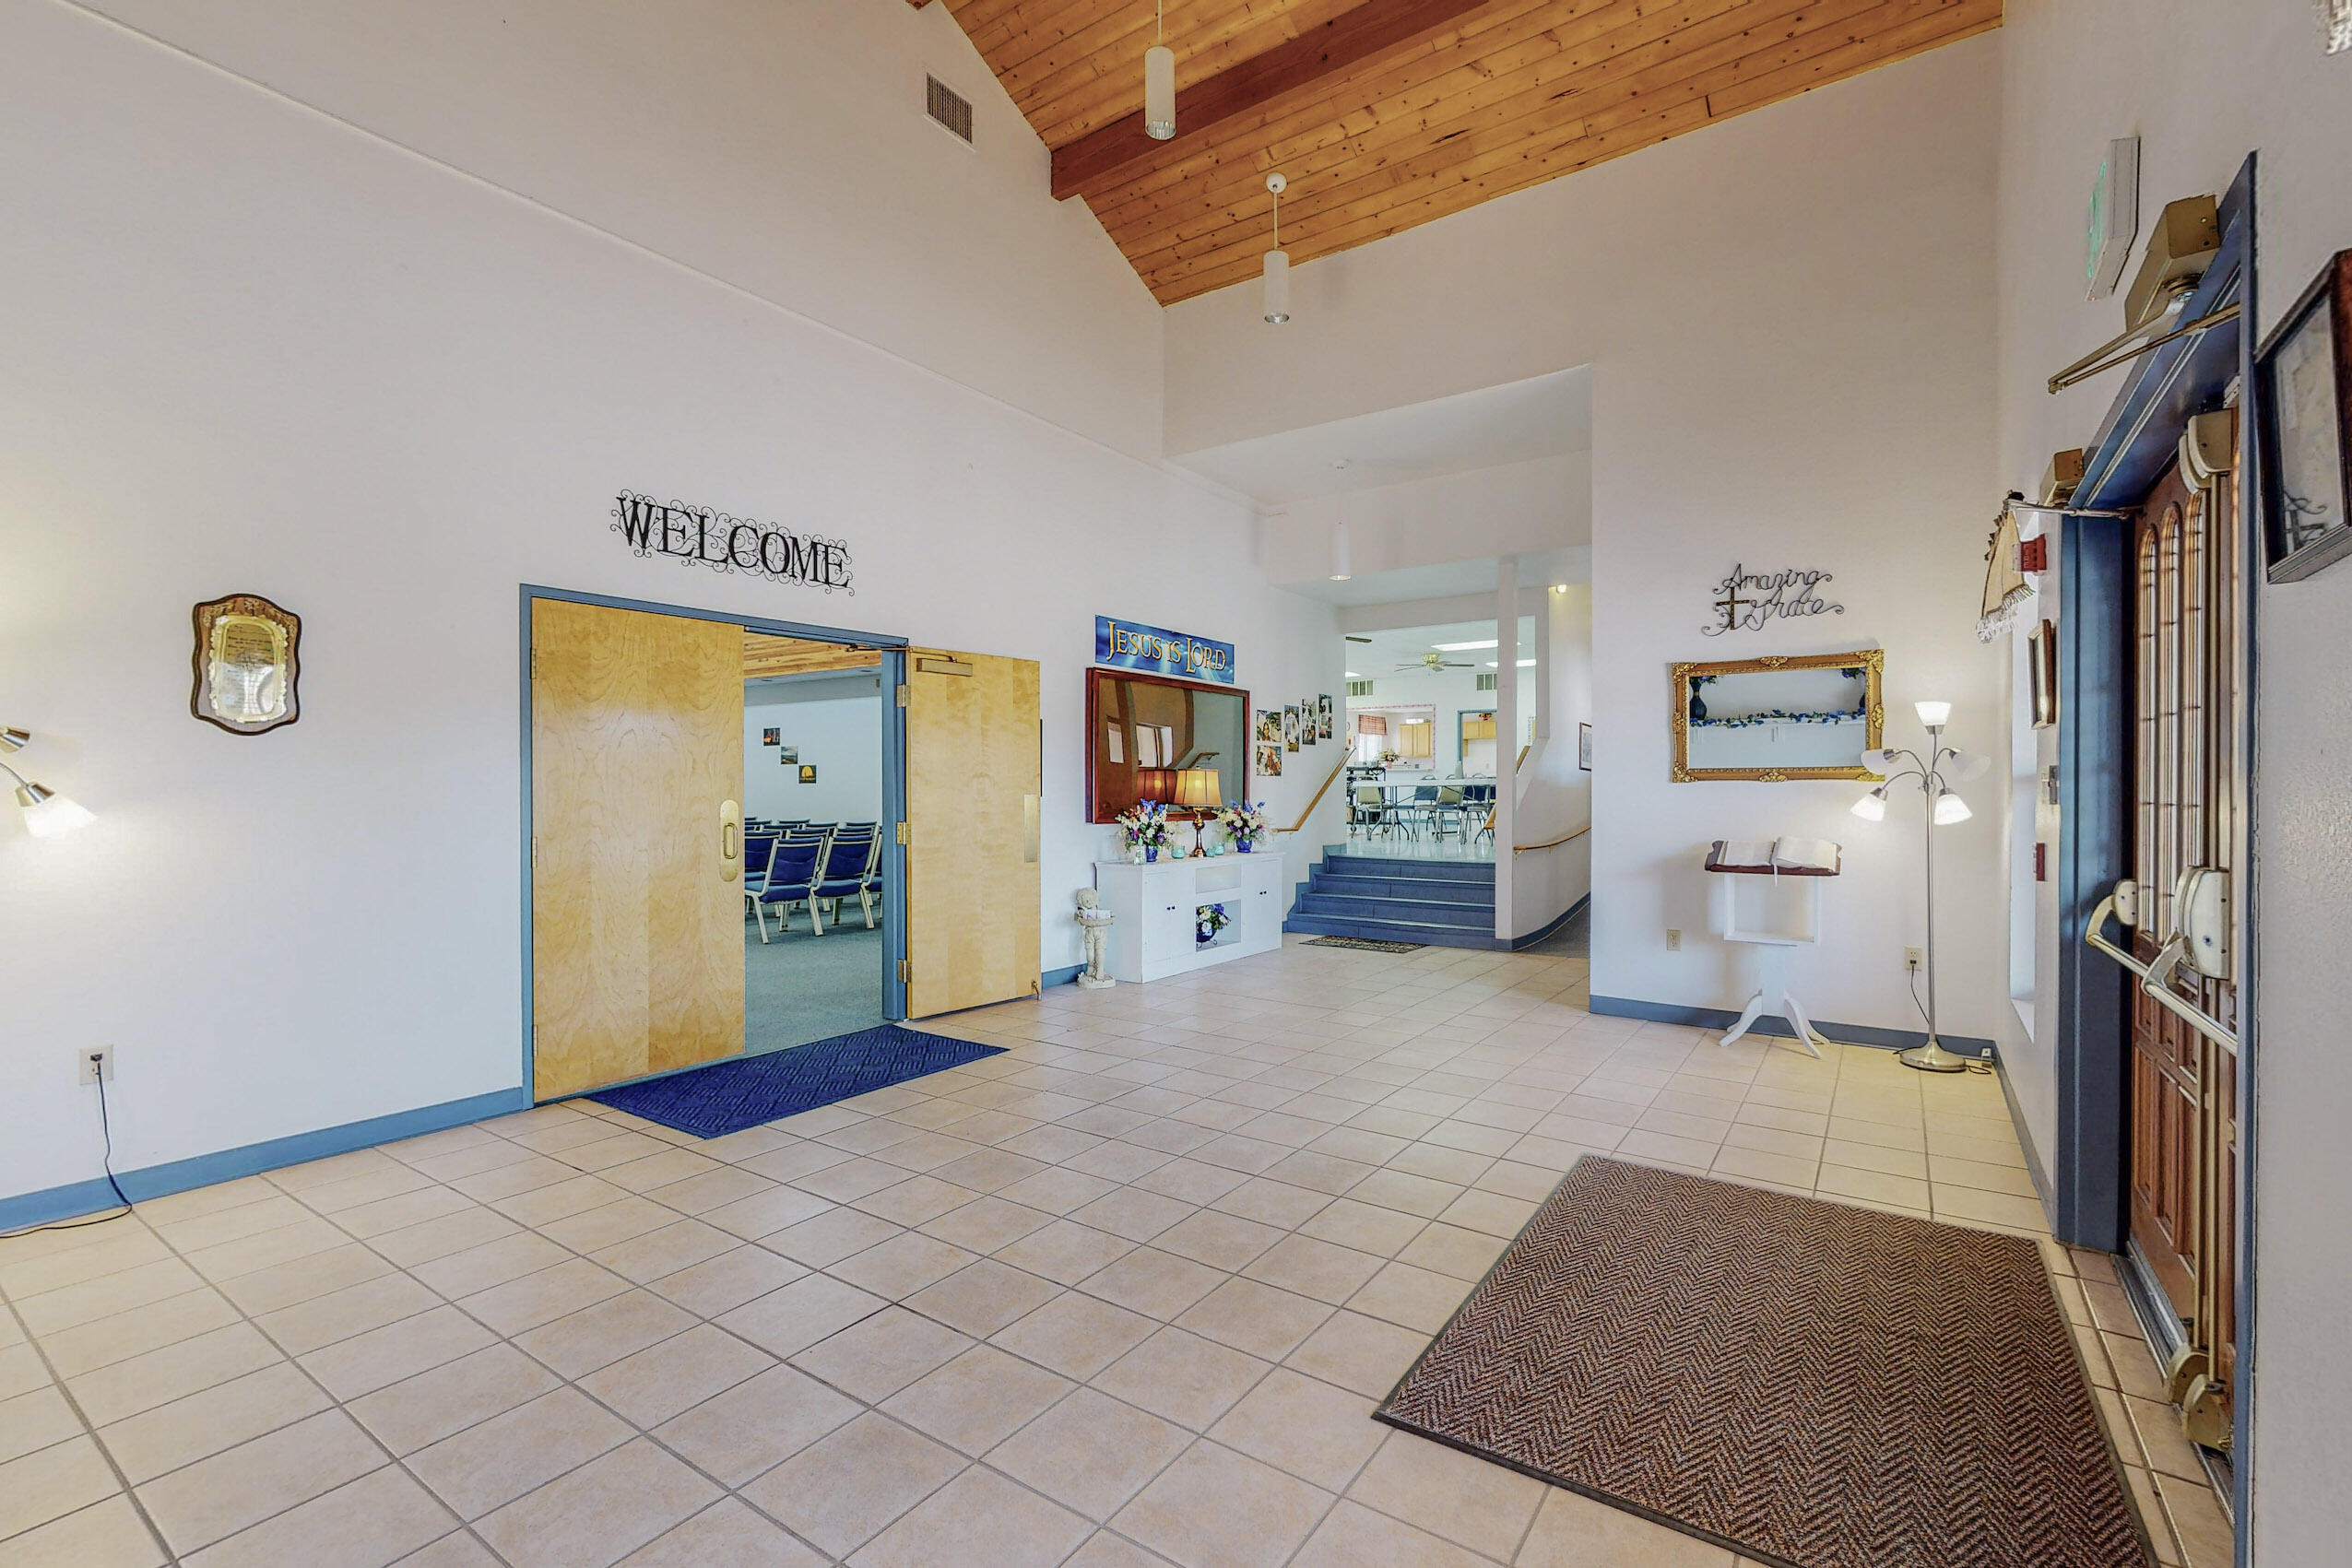 105 Academy Drive, Bernalillo, New Mexico 87004, ,Commercial Sale,For Sale,105 Academy Drive,1030323